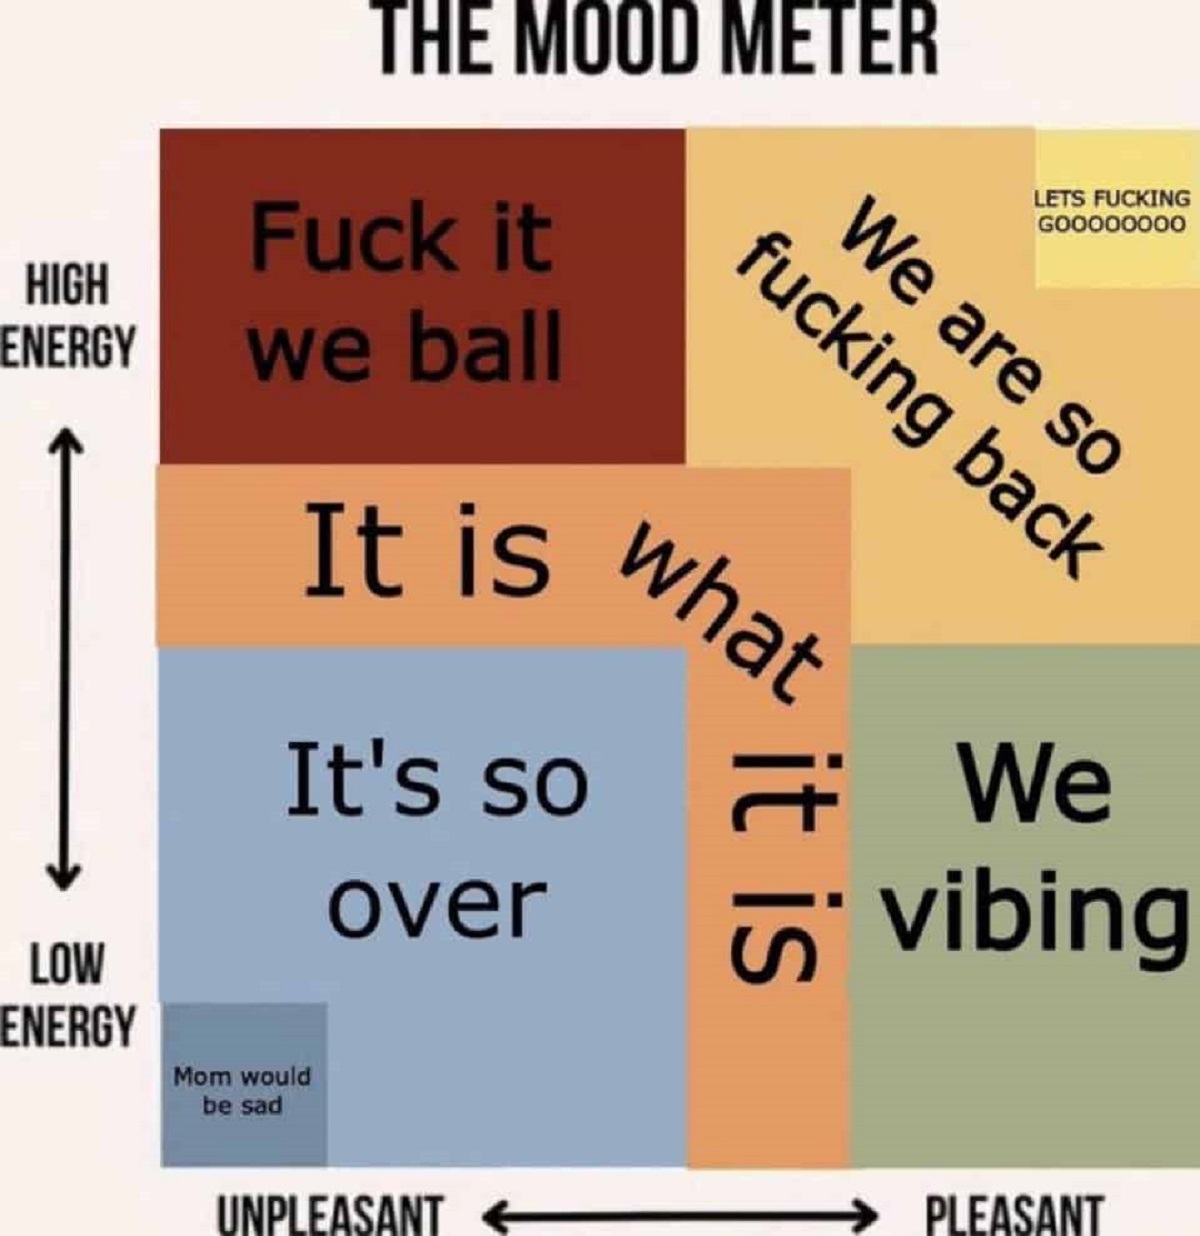 mood meter meme - The Mood Meter Lets Fucking G00000000 We are so fucking back what Fuck it High Energy we ball It is It's so over Low Energy Mom would be sad Unpleasant it is We vibing Pleasant